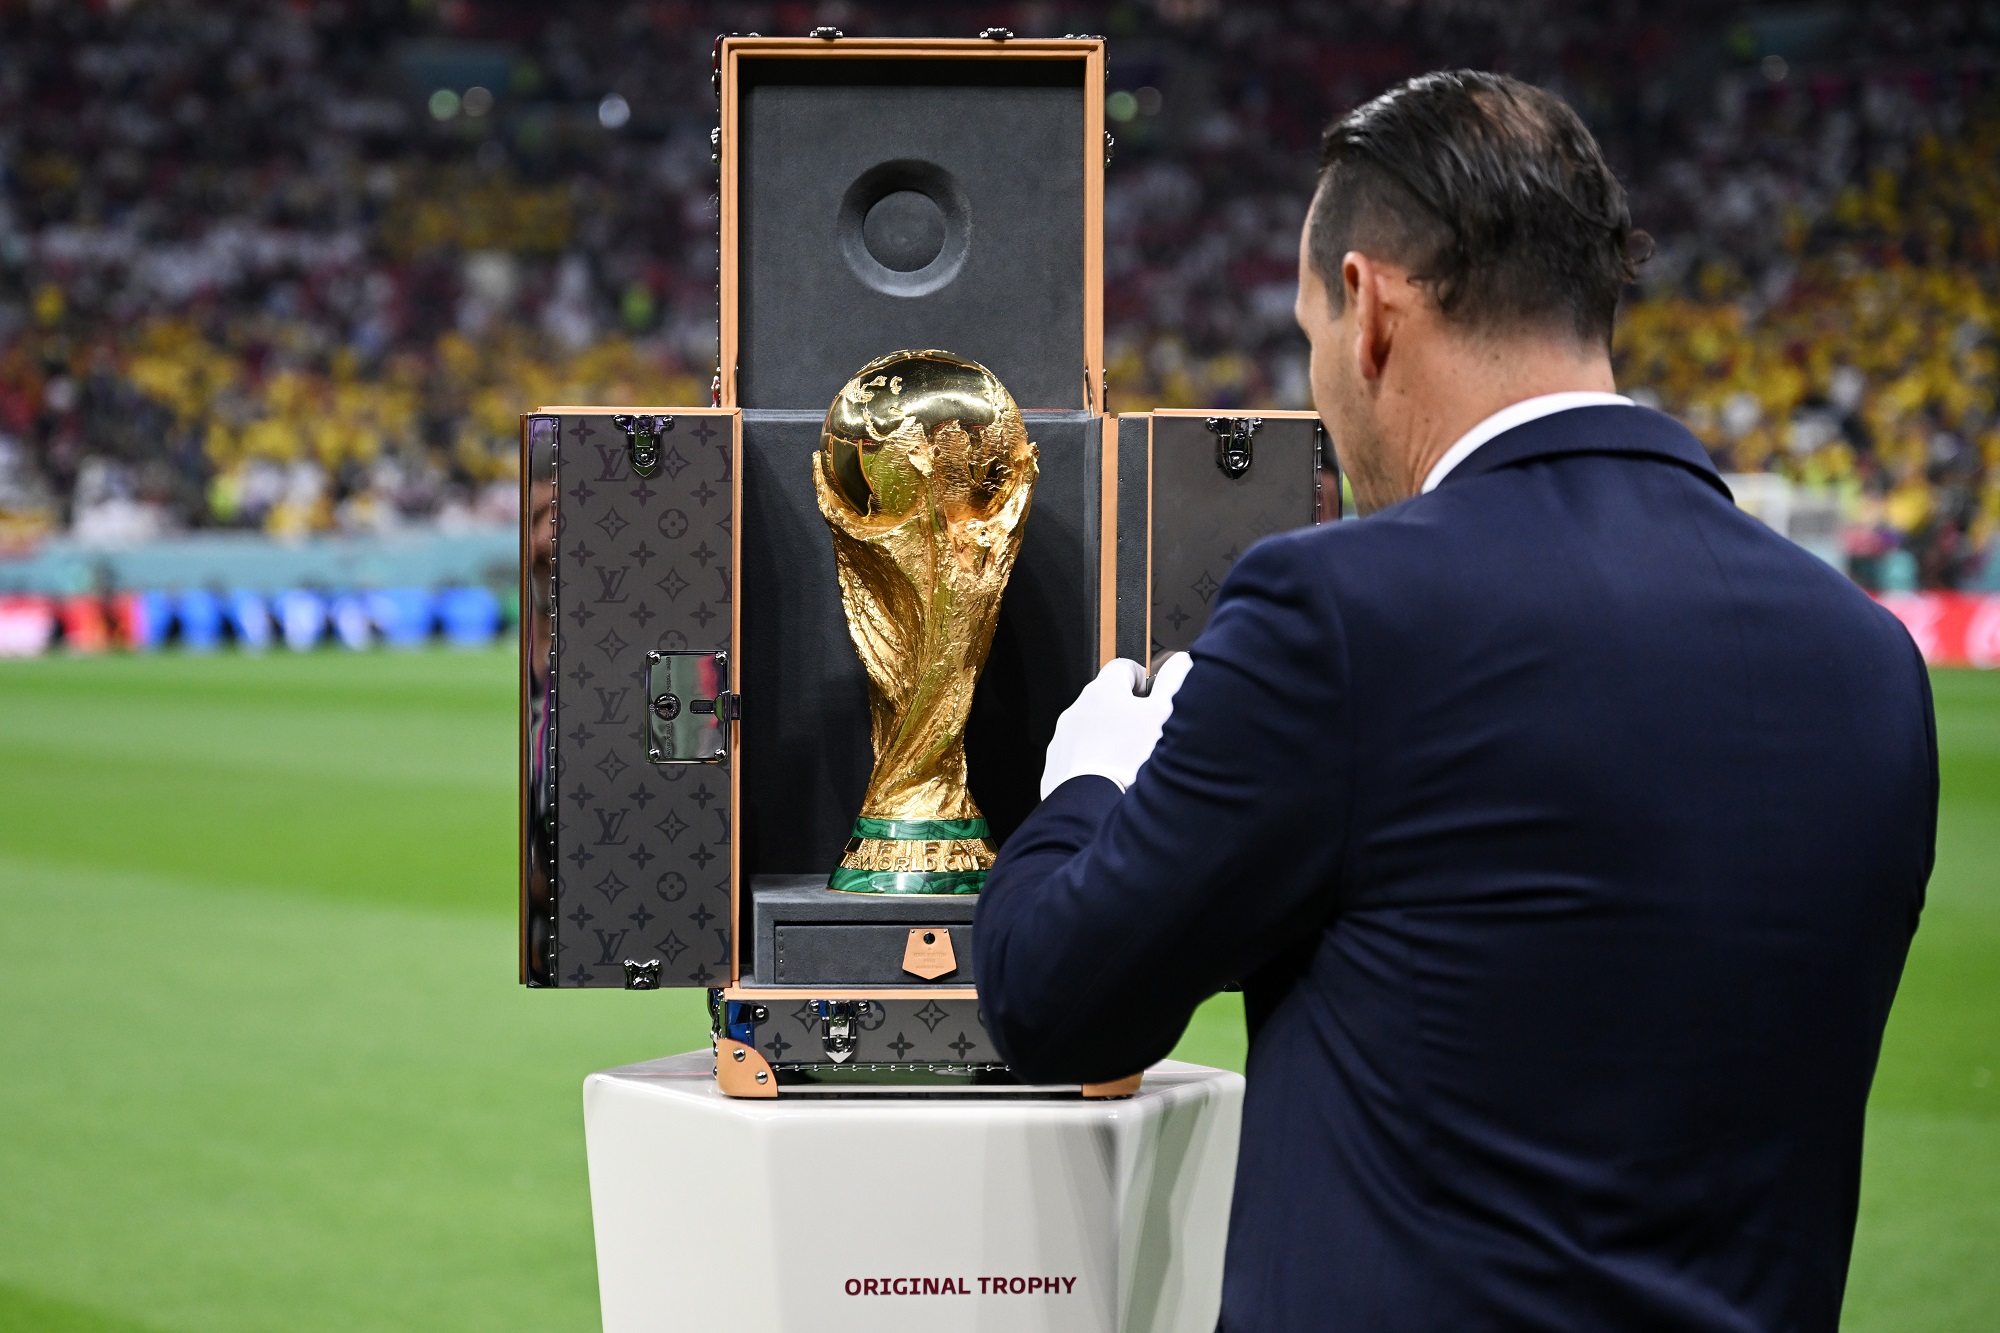 FIFA World Cup trophy: History, design and more